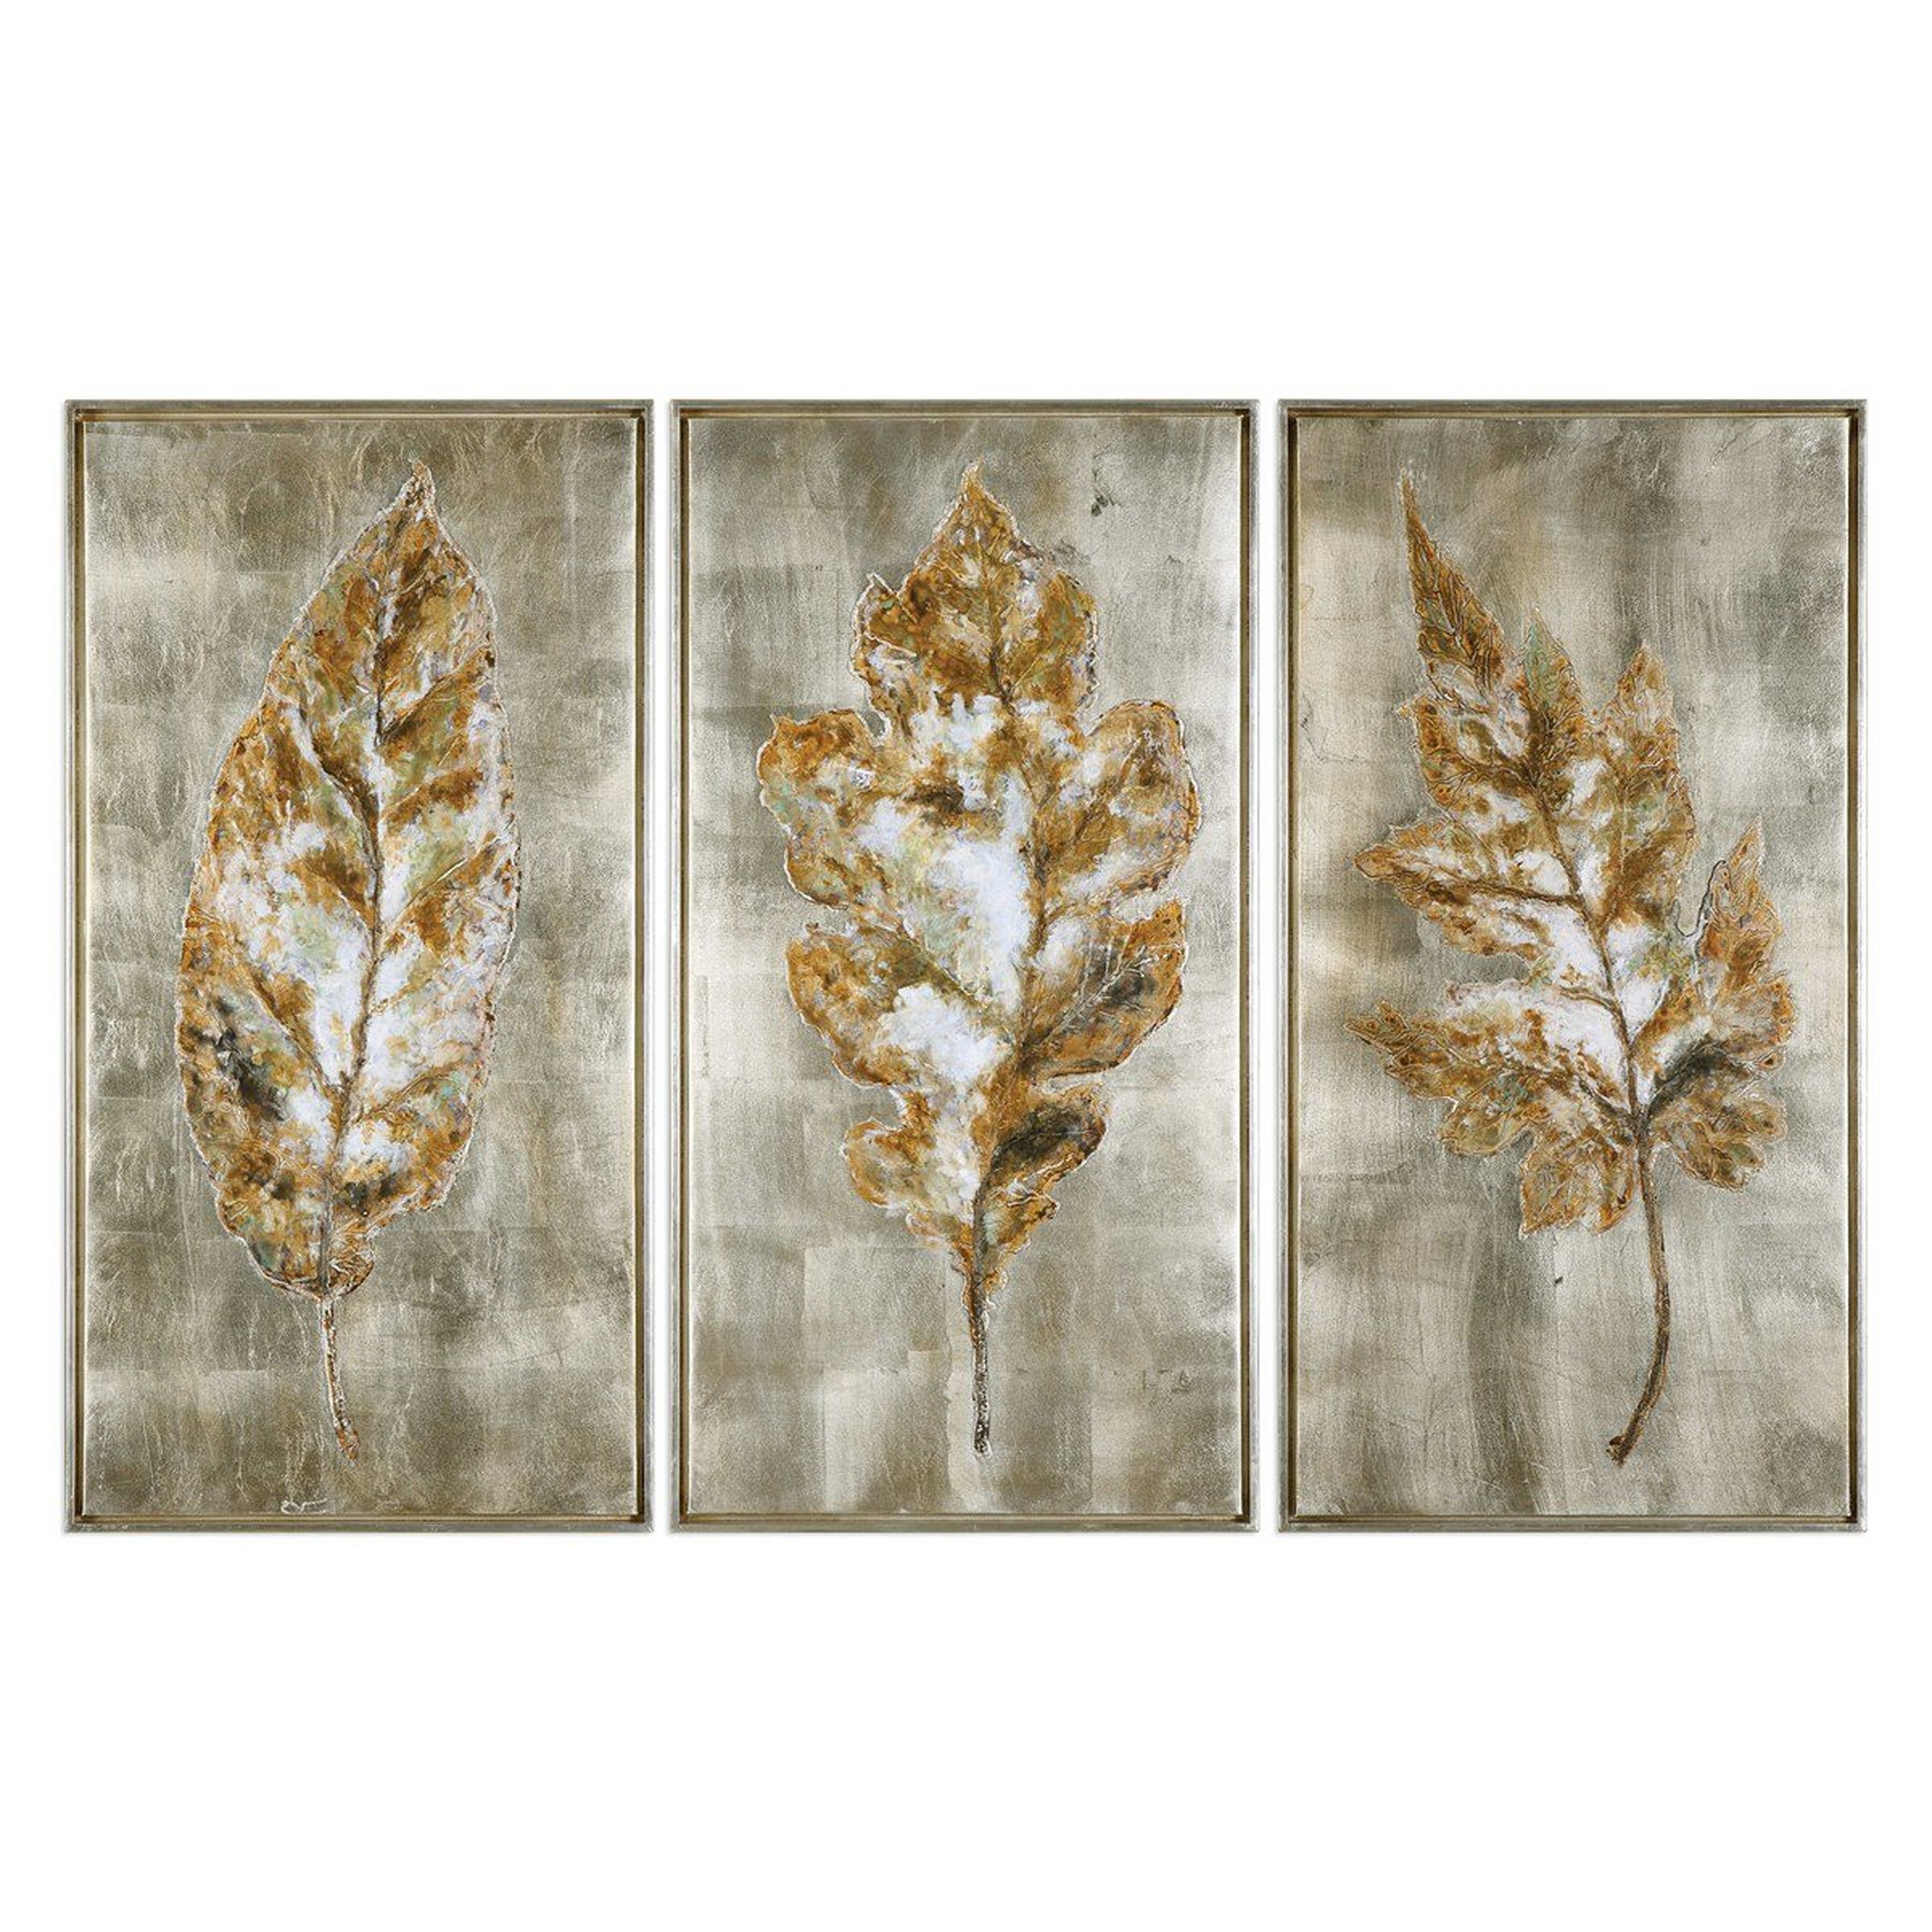 CHAMPAGNE LEAVES HAND PAINTED CANVASES, S/3 - Hudsonhill Foundry